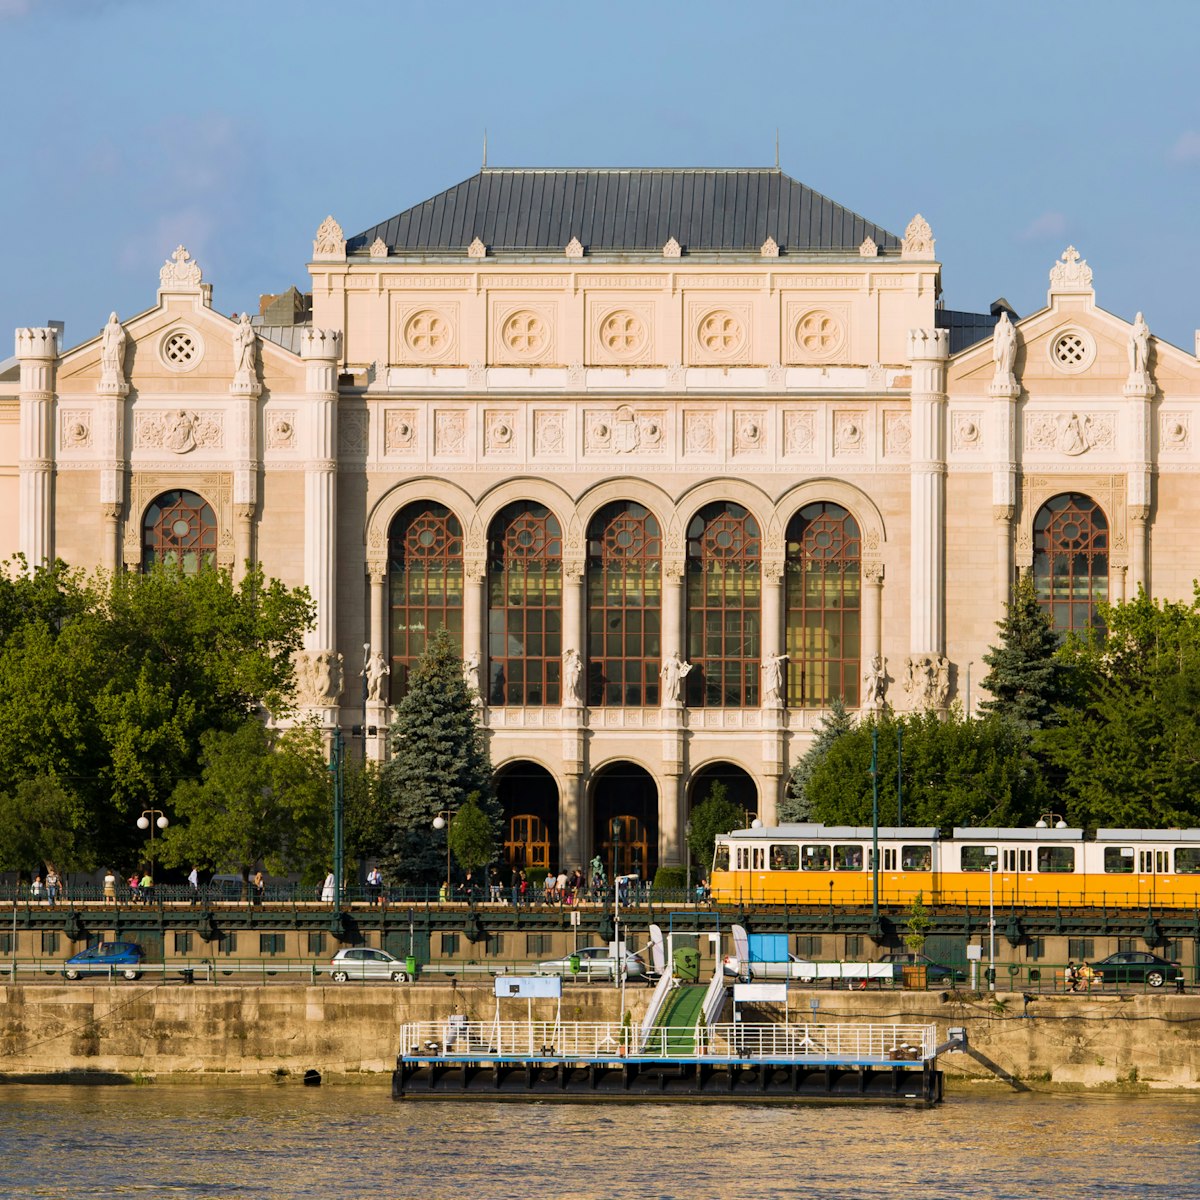 500px Photo ID: 103732133 - Vigado Concert Hall and Danube river waterfront in Budapest, Hungary.